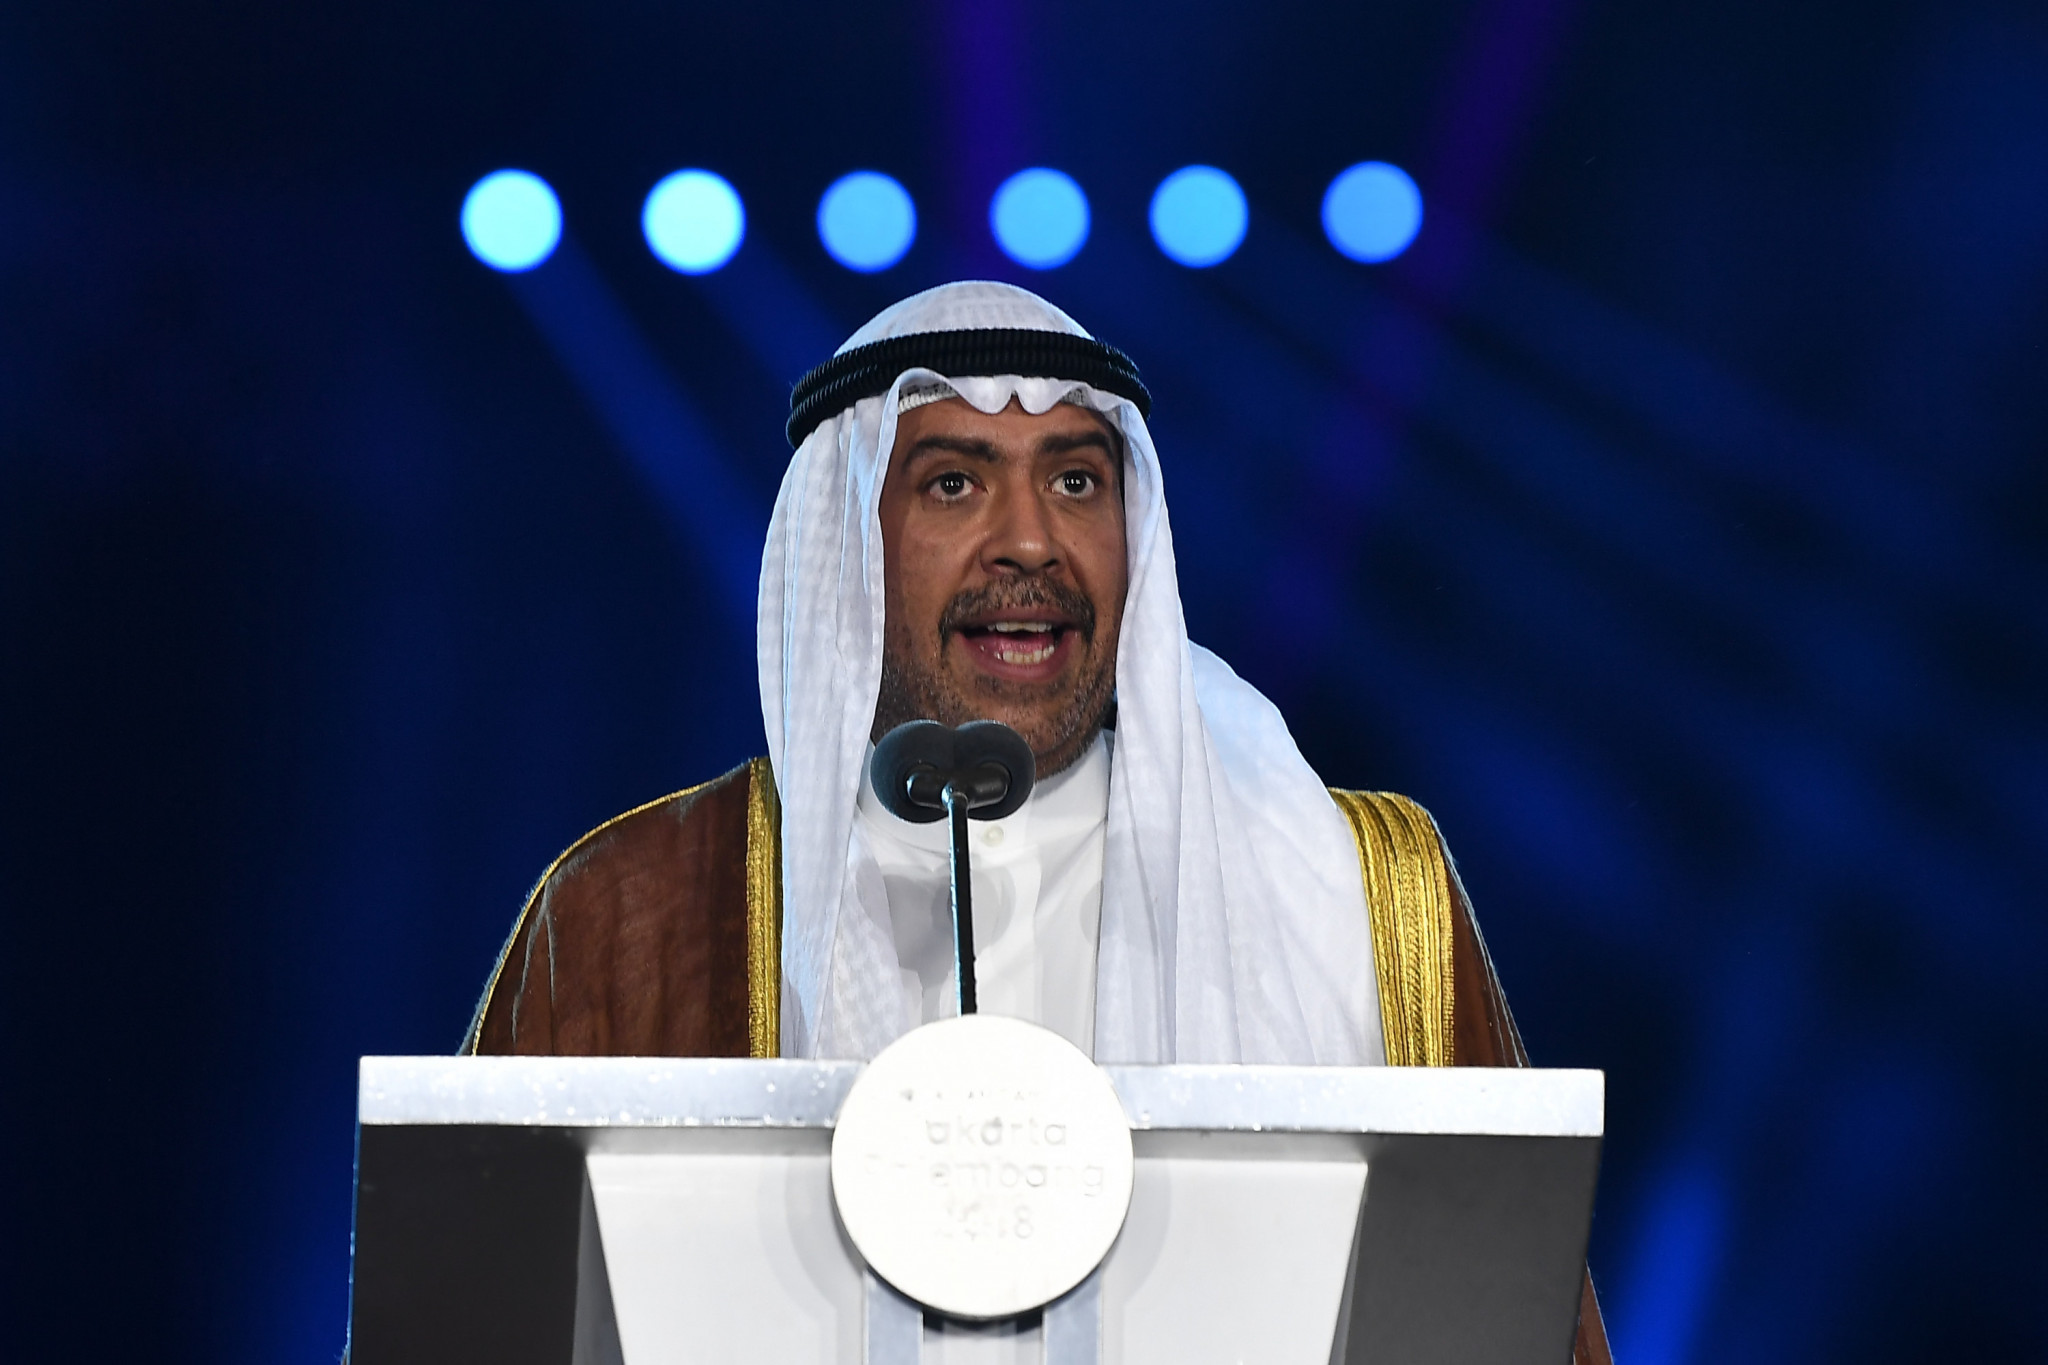 Sheikh Ahmad Al-Fahad Al-Sabah has stepped aside temporarily from his roles and responsibilities as an International Olympic Committee member and chairman of the Olympic Solidarity Commission ©Getty Images